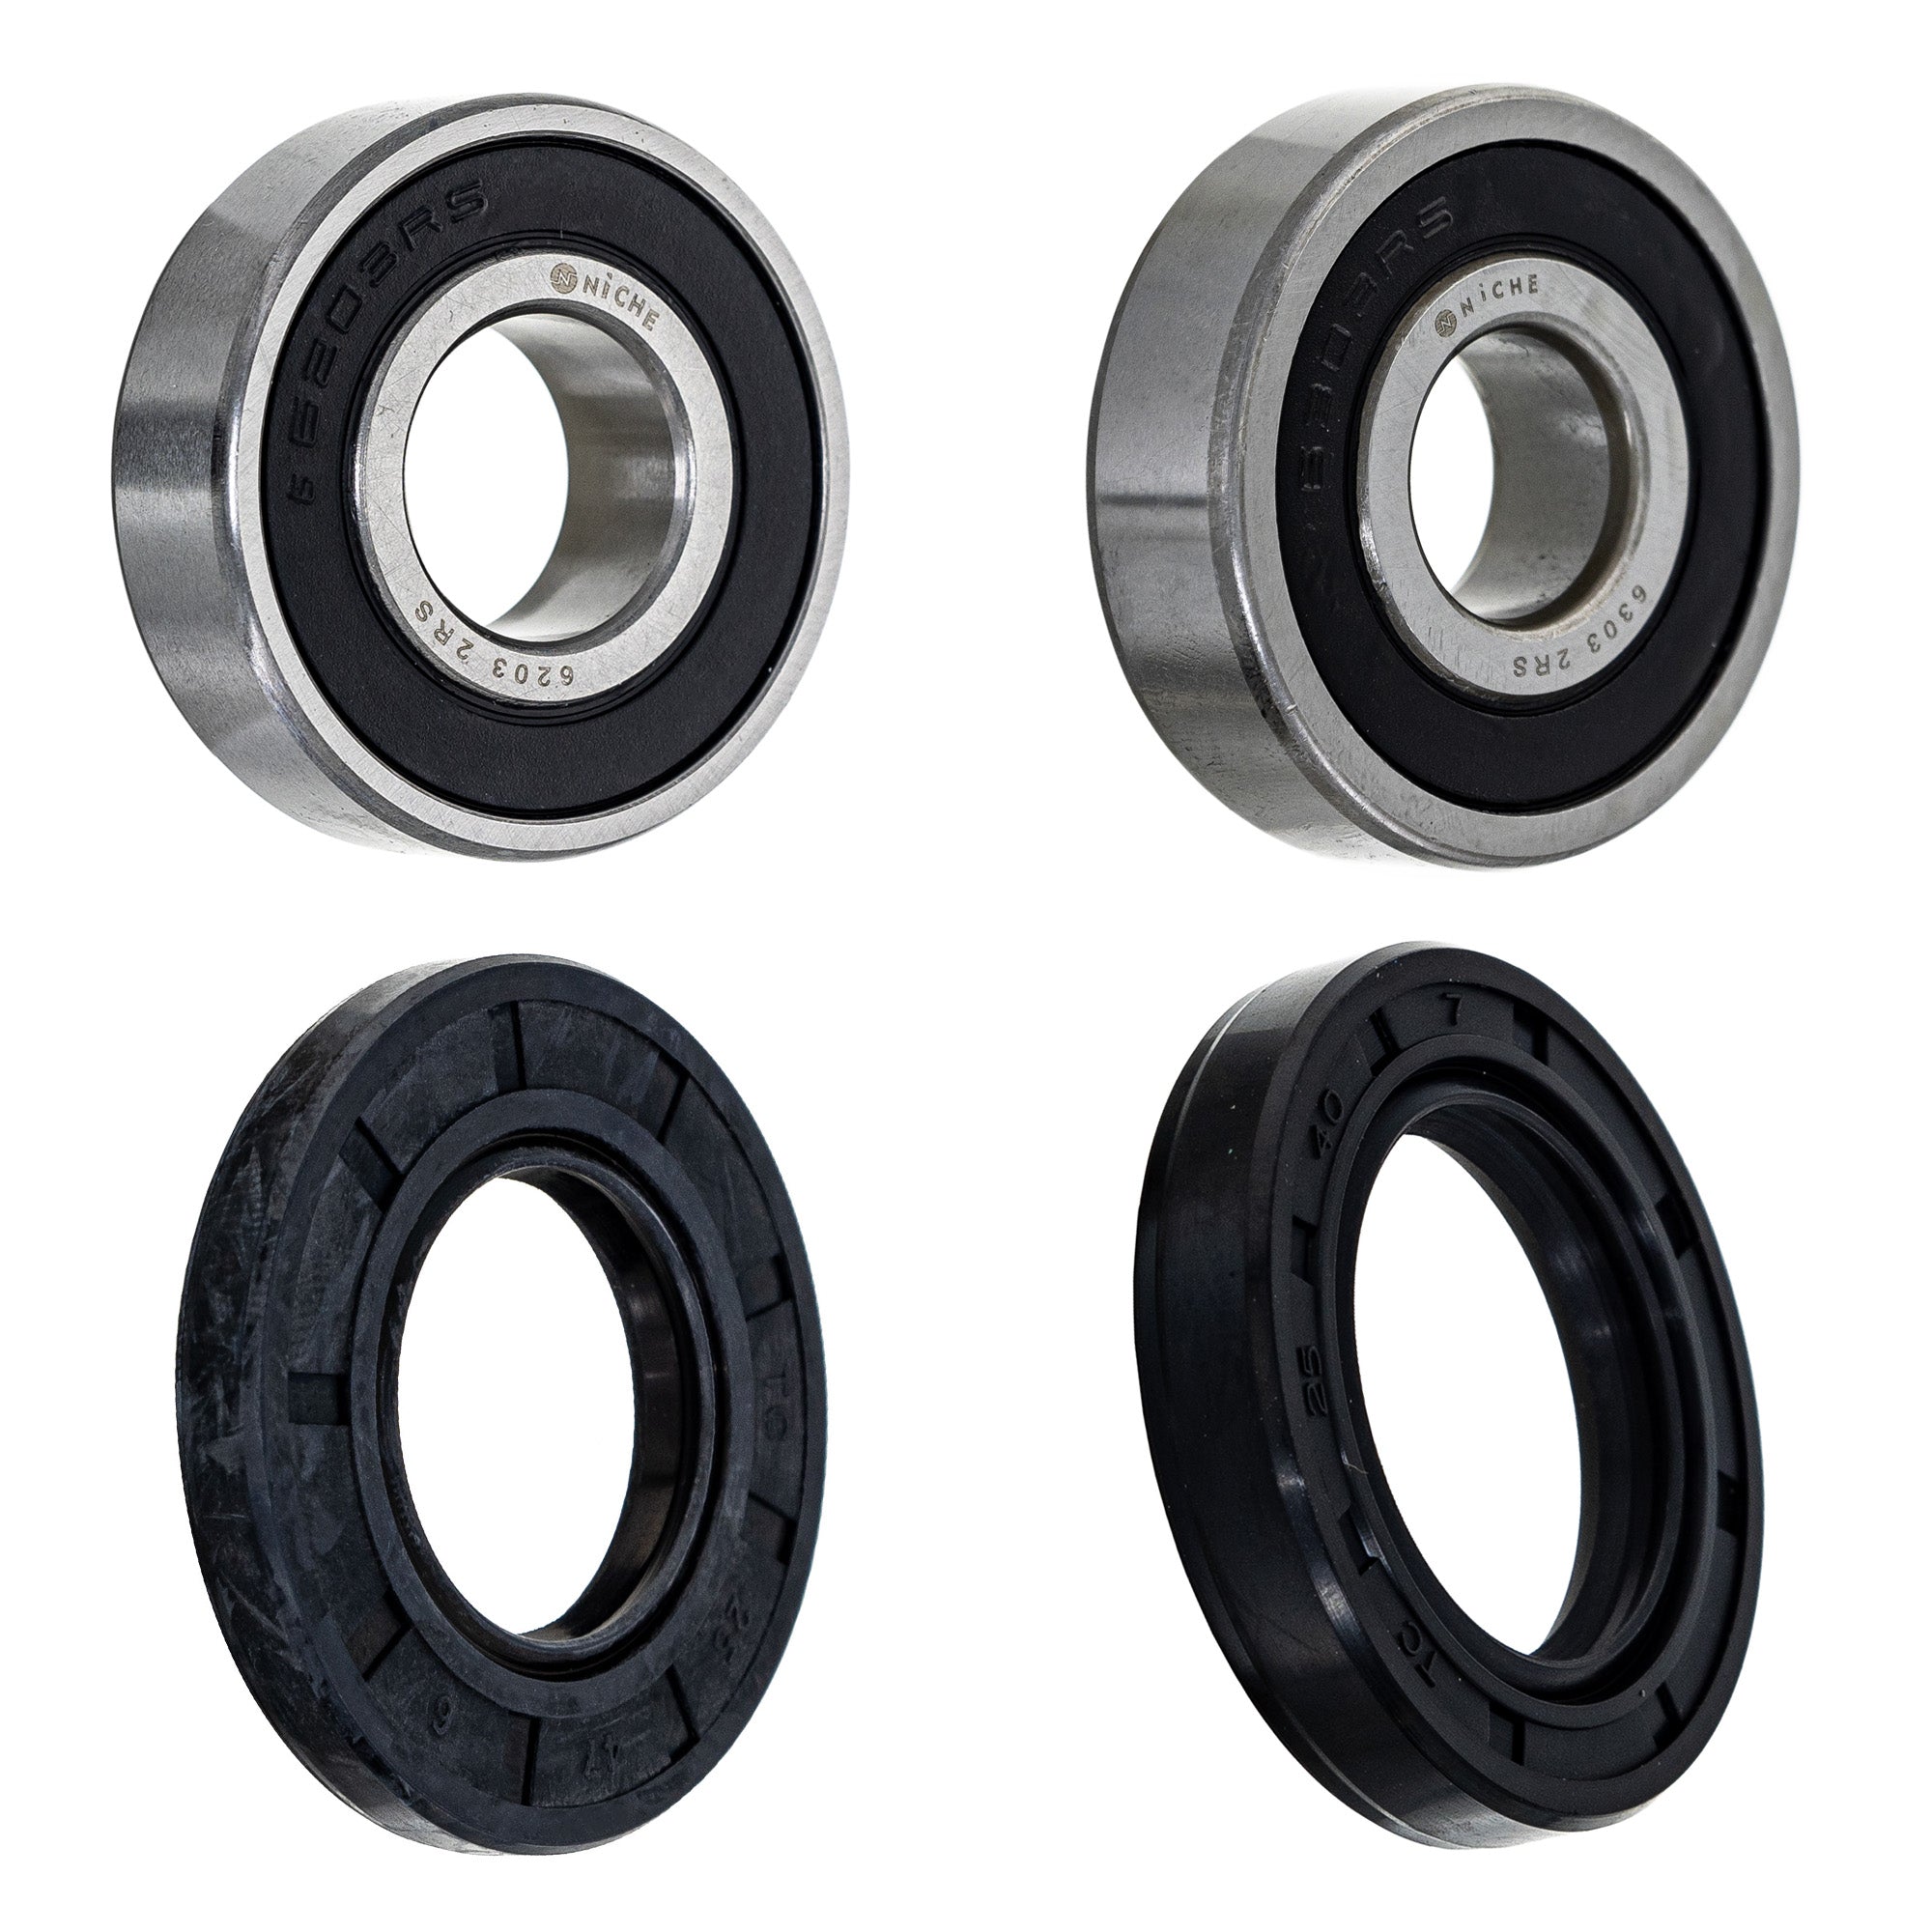 Wheel Bearing Seal Kit for zOTHER Ref No XR400R XR250R CRF230L NICHE MK1008872